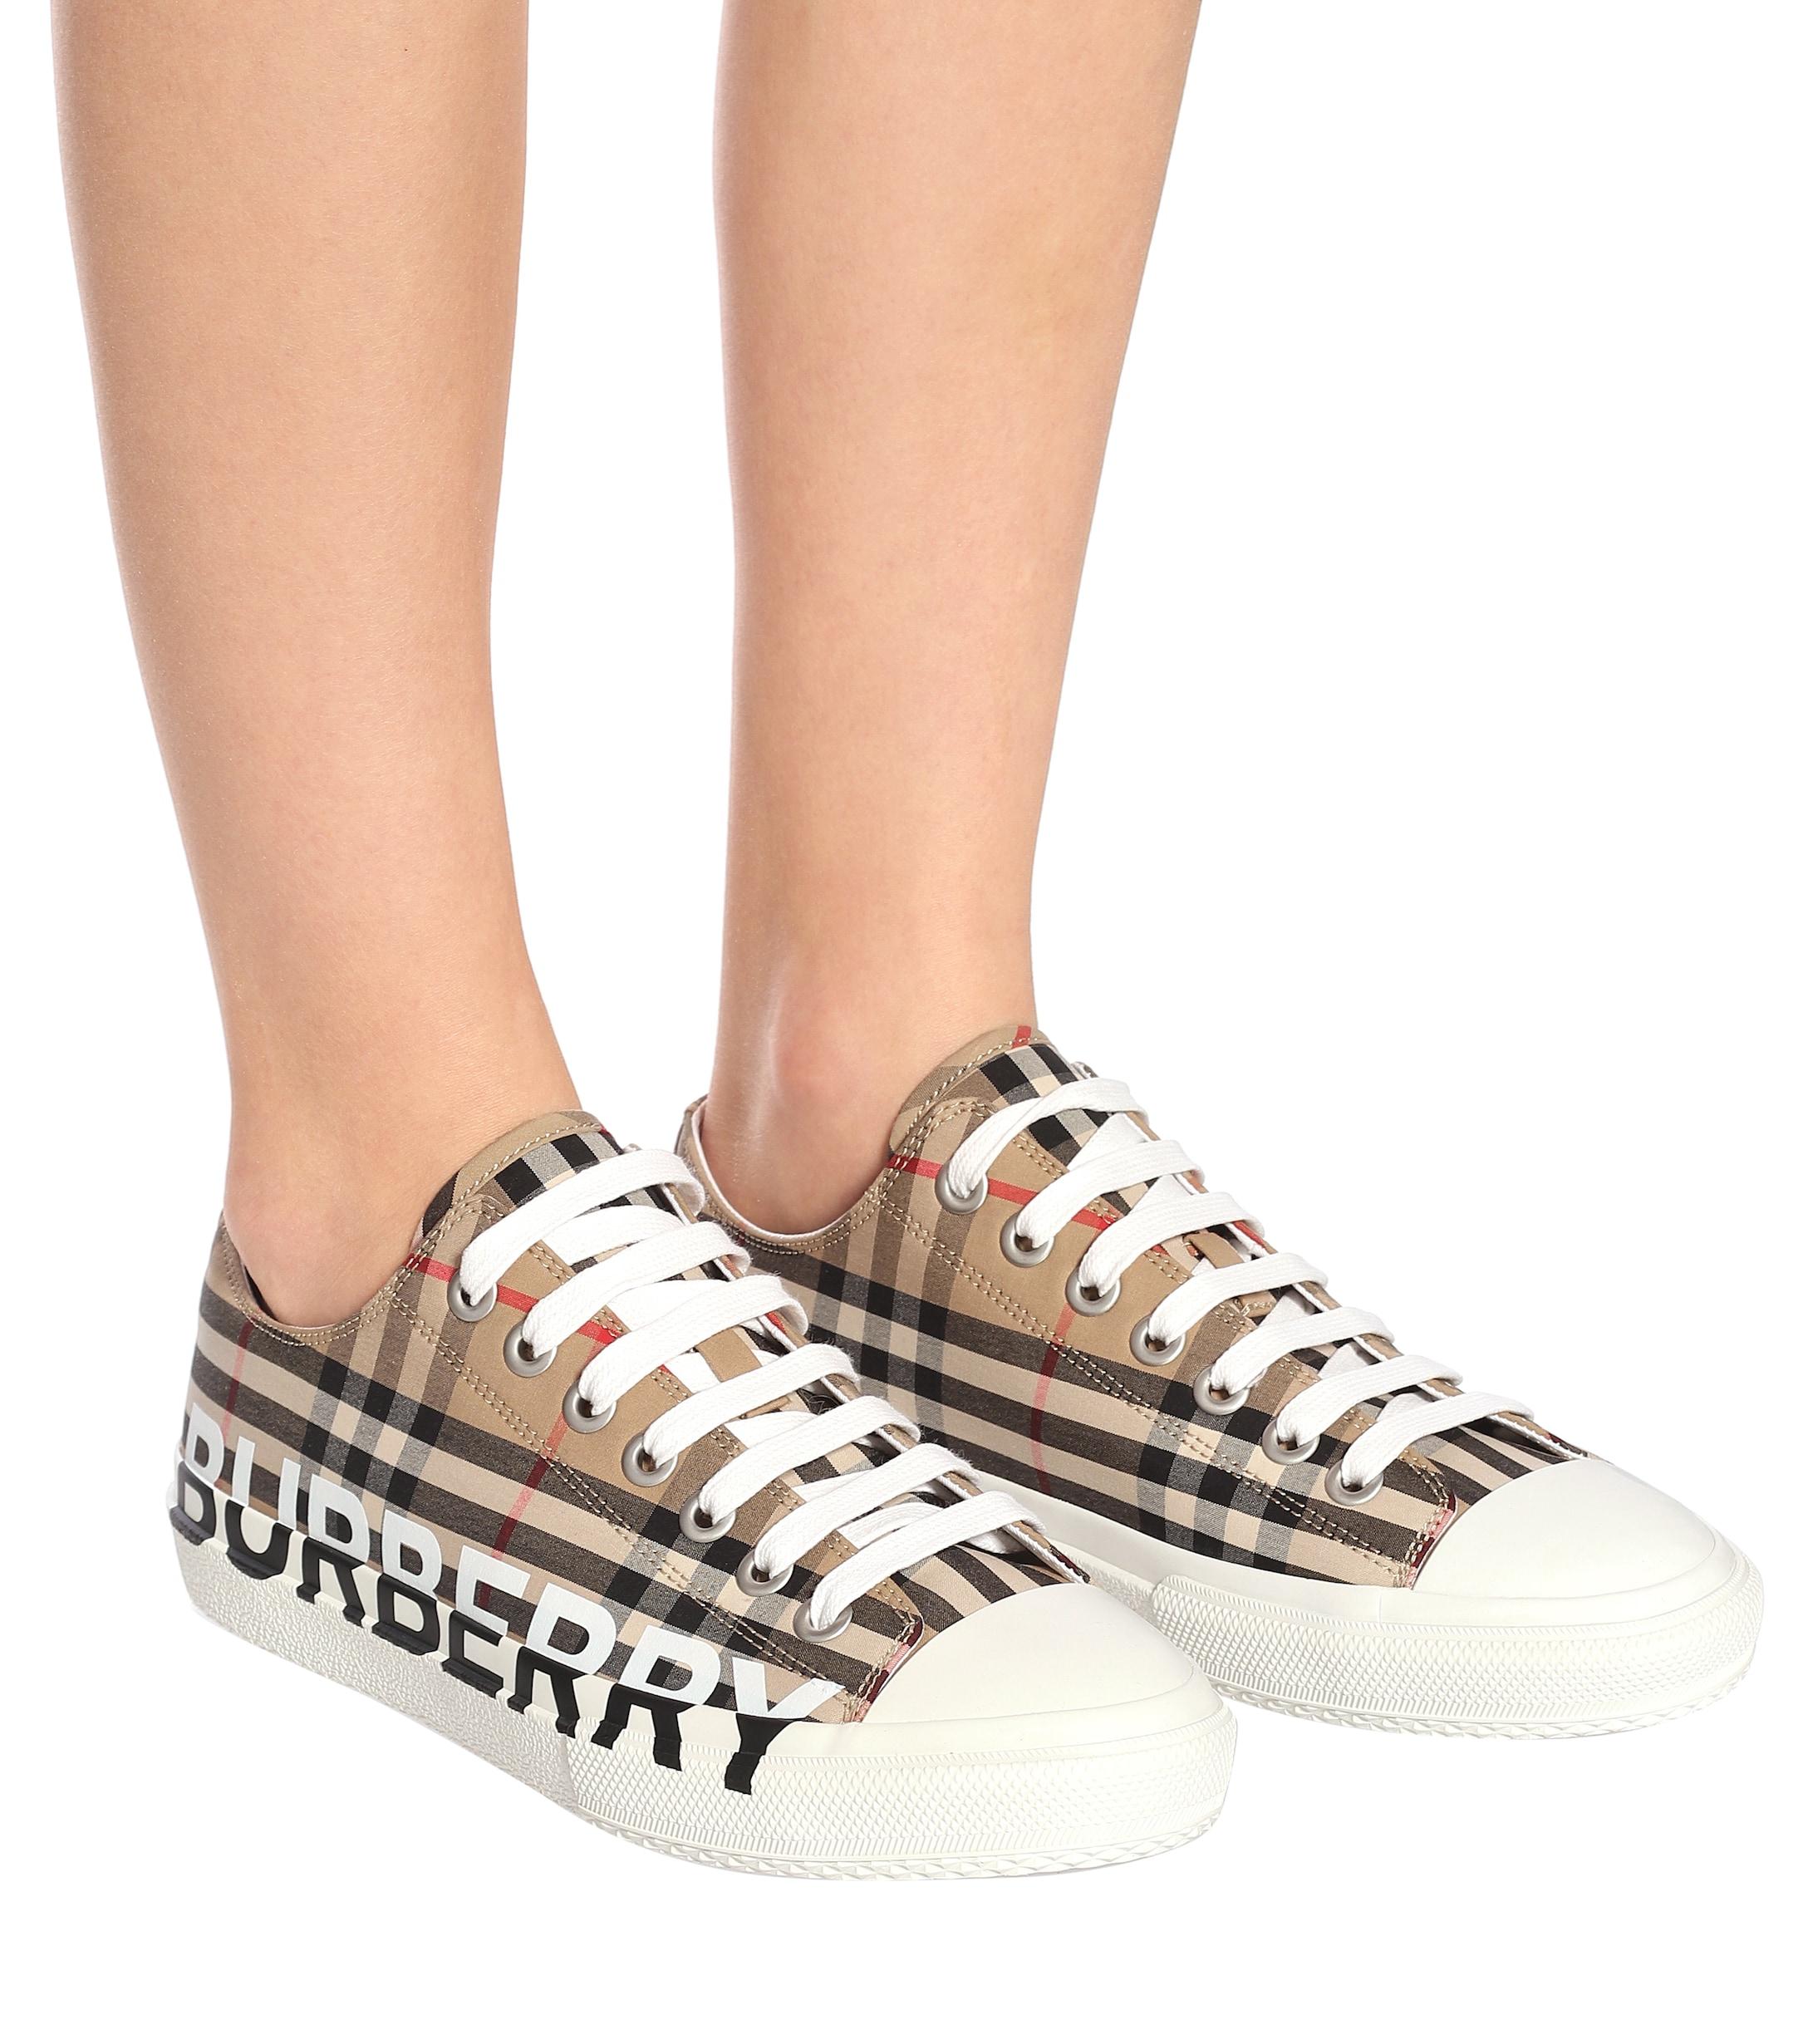 Burberry Vintage Check Sneaker - www.inf-inet.com